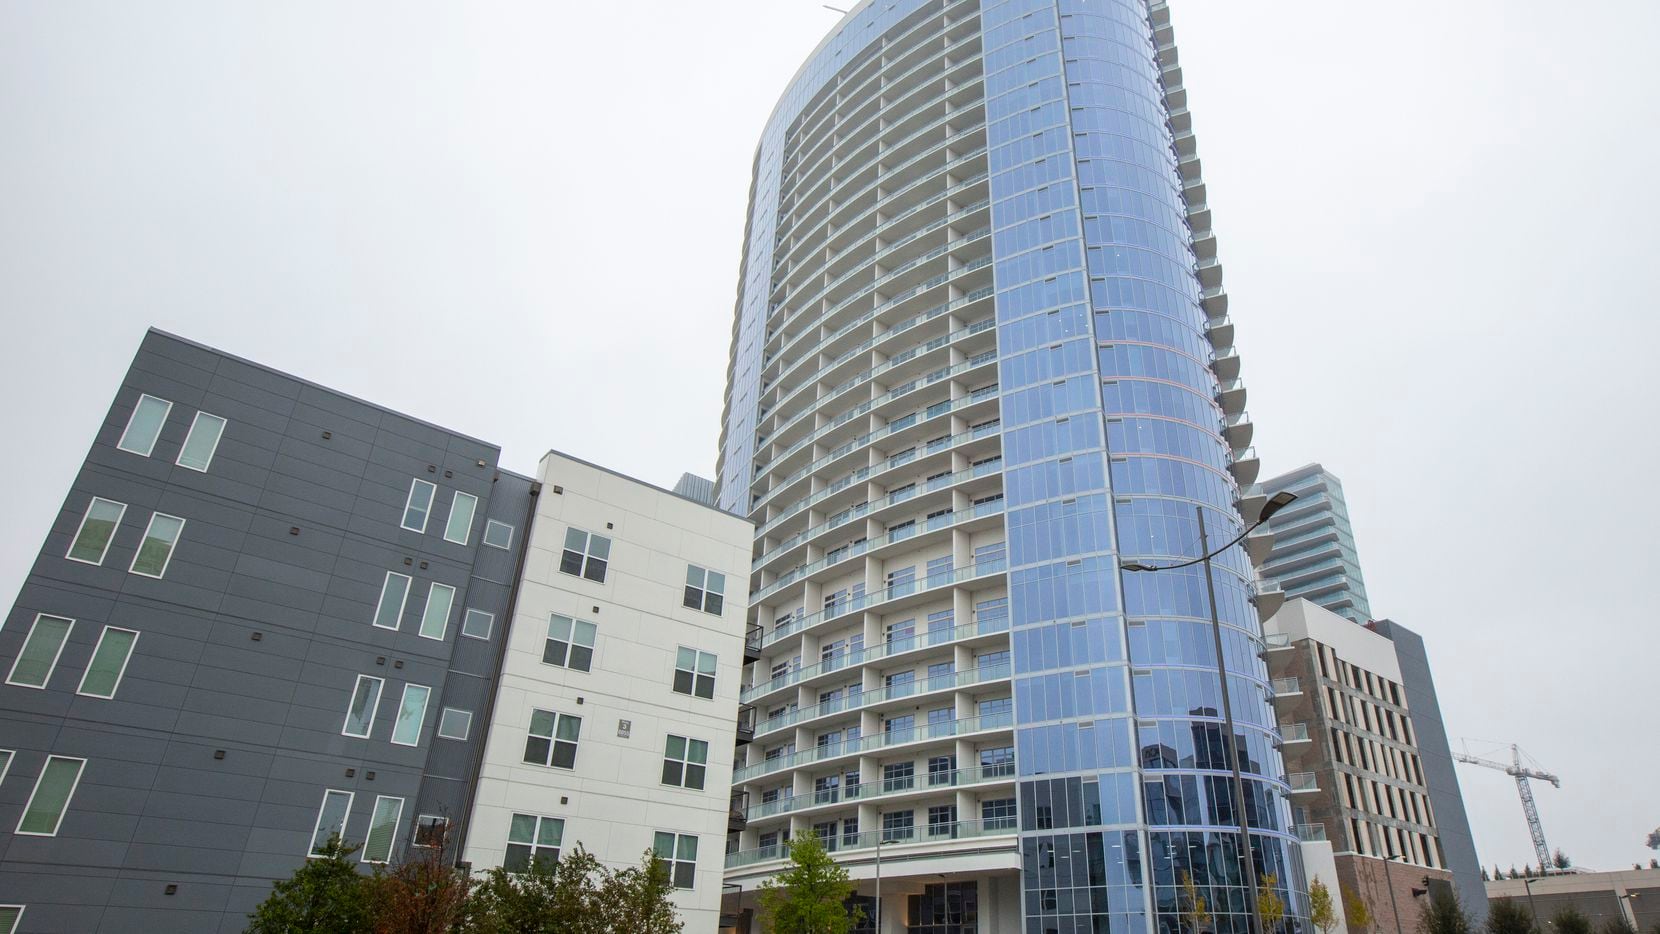 The 29-story LVL29 apartment high-rise in Plano is pictured in this file photo. Despite the city's relatively high housing costs, Plano was recently named the best city in the nation for renters due to the high median income that offsets those costs.